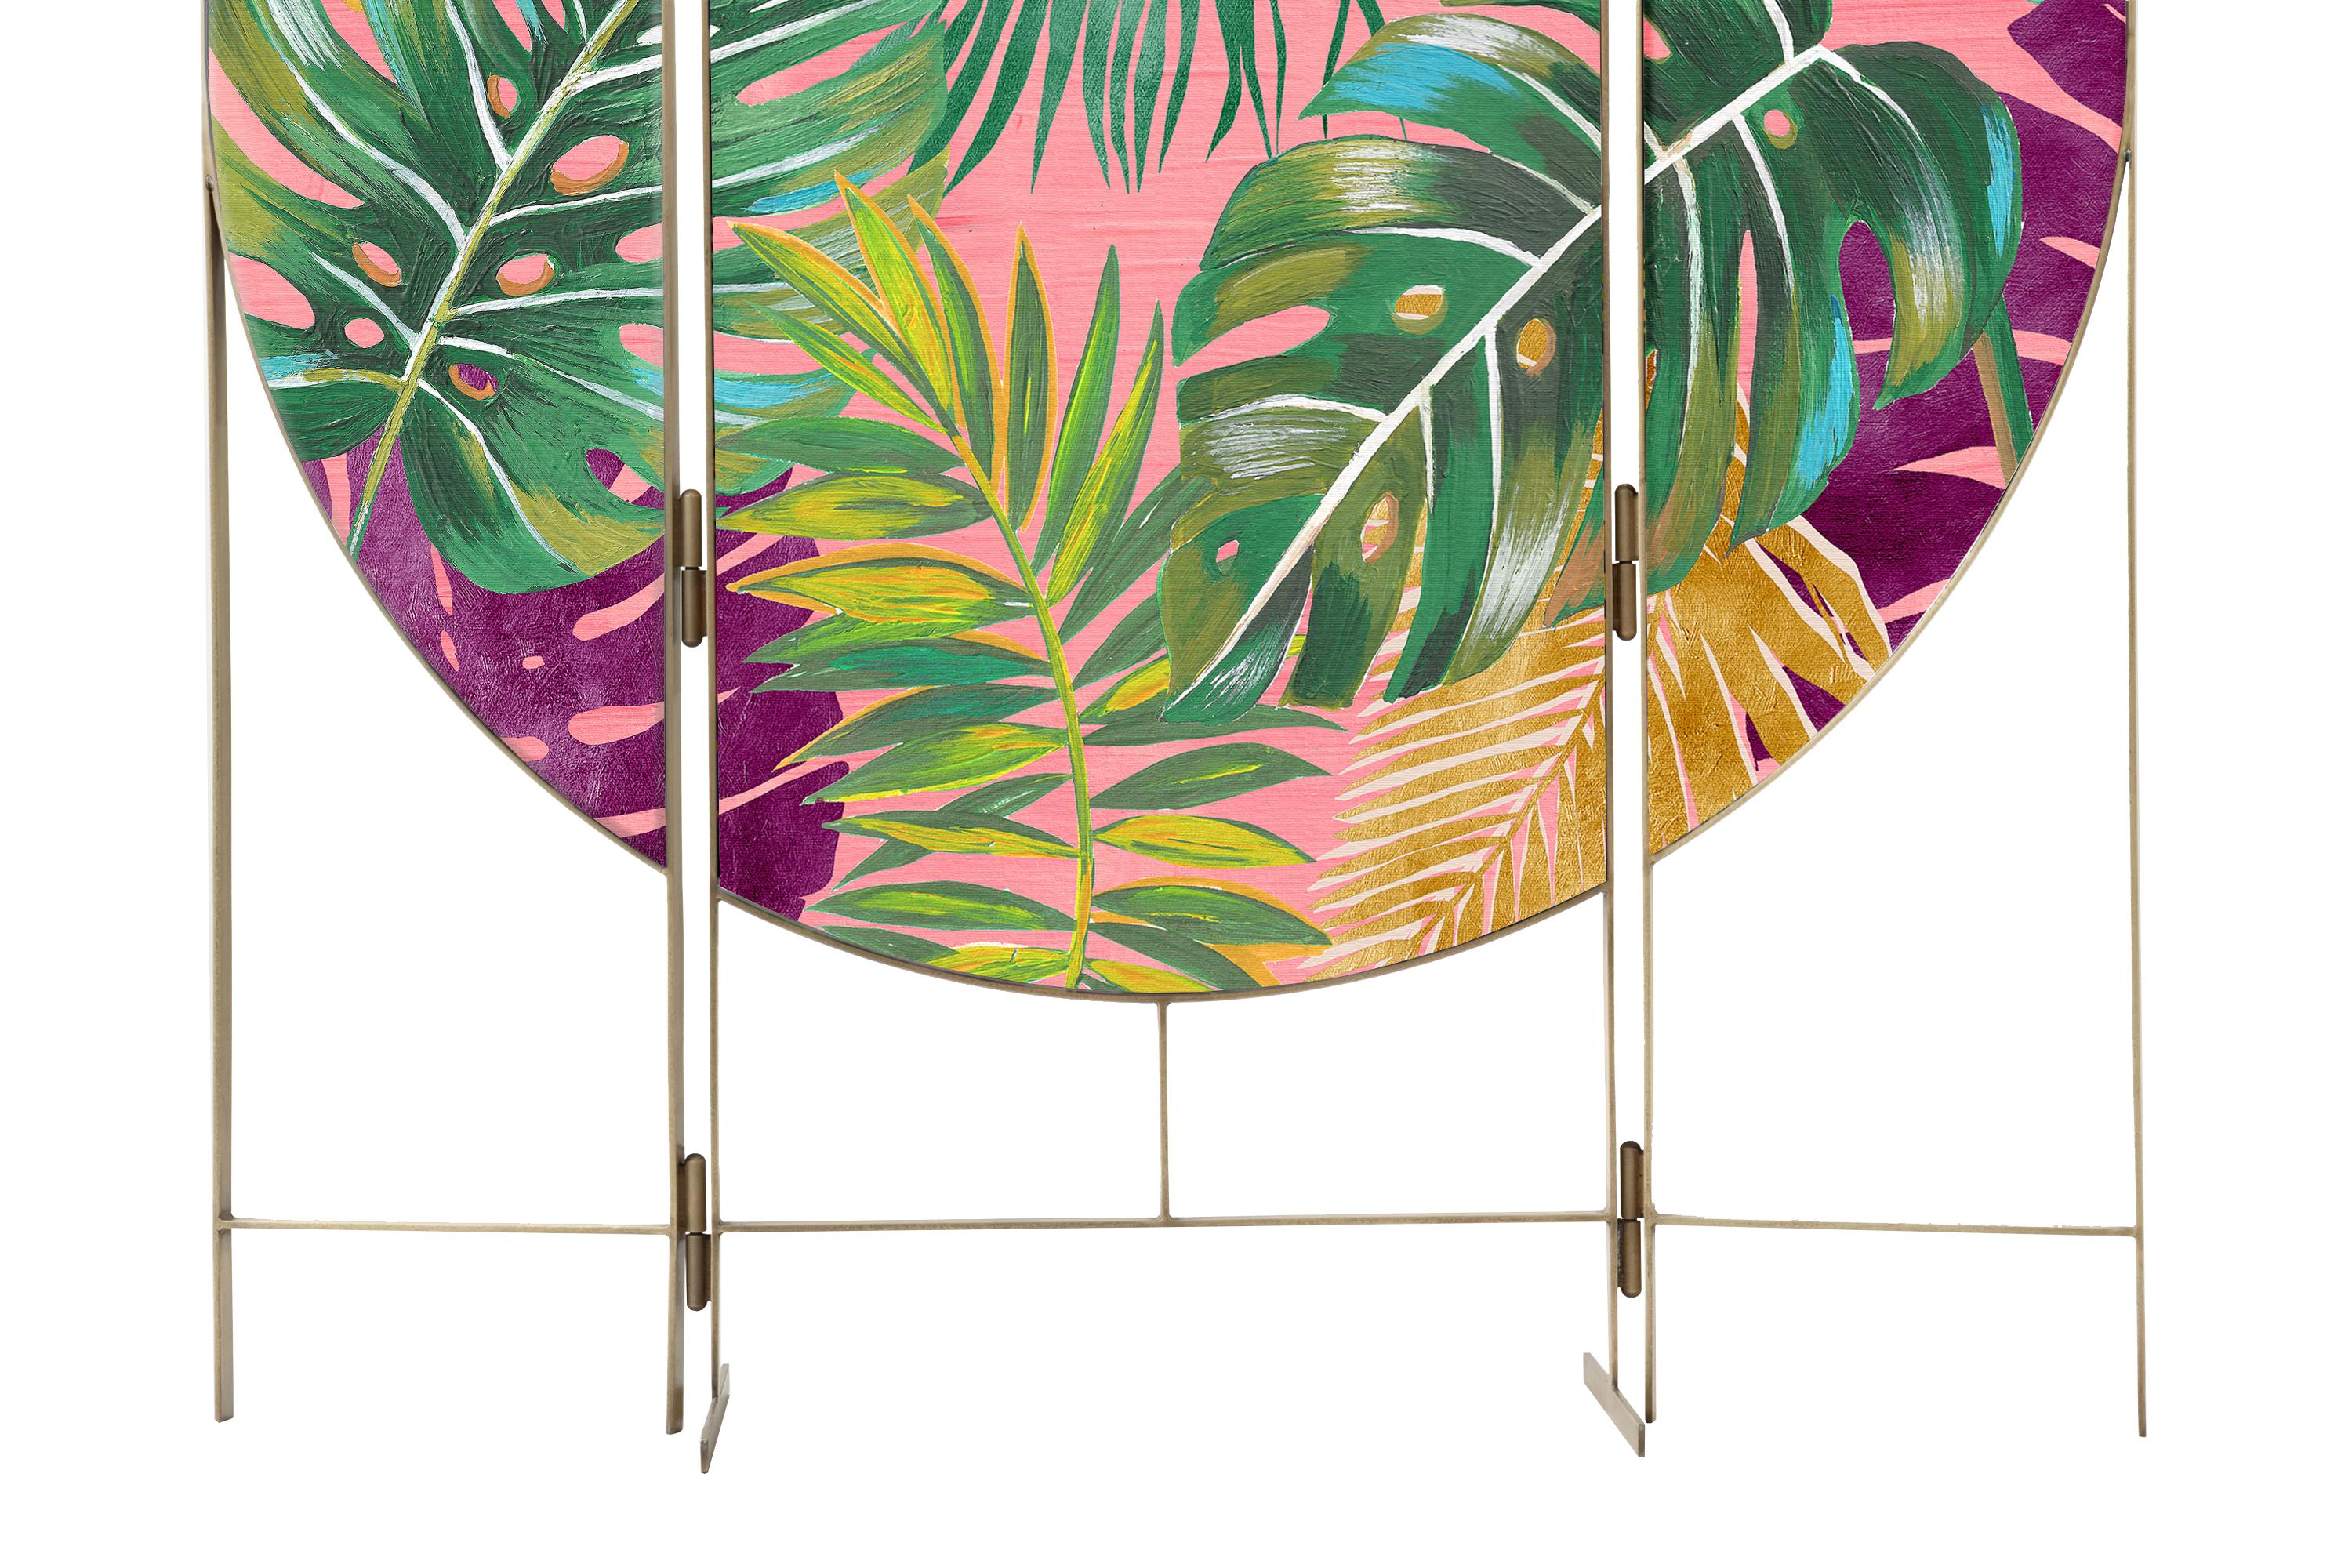 Fine upholstered in Matthew Williamson’s delicate Palm Springs print, which has been exclusively designed for Roome London, the Queenie screen is a statement piece that can be used as a standalone piece of art or as a sophisticated room